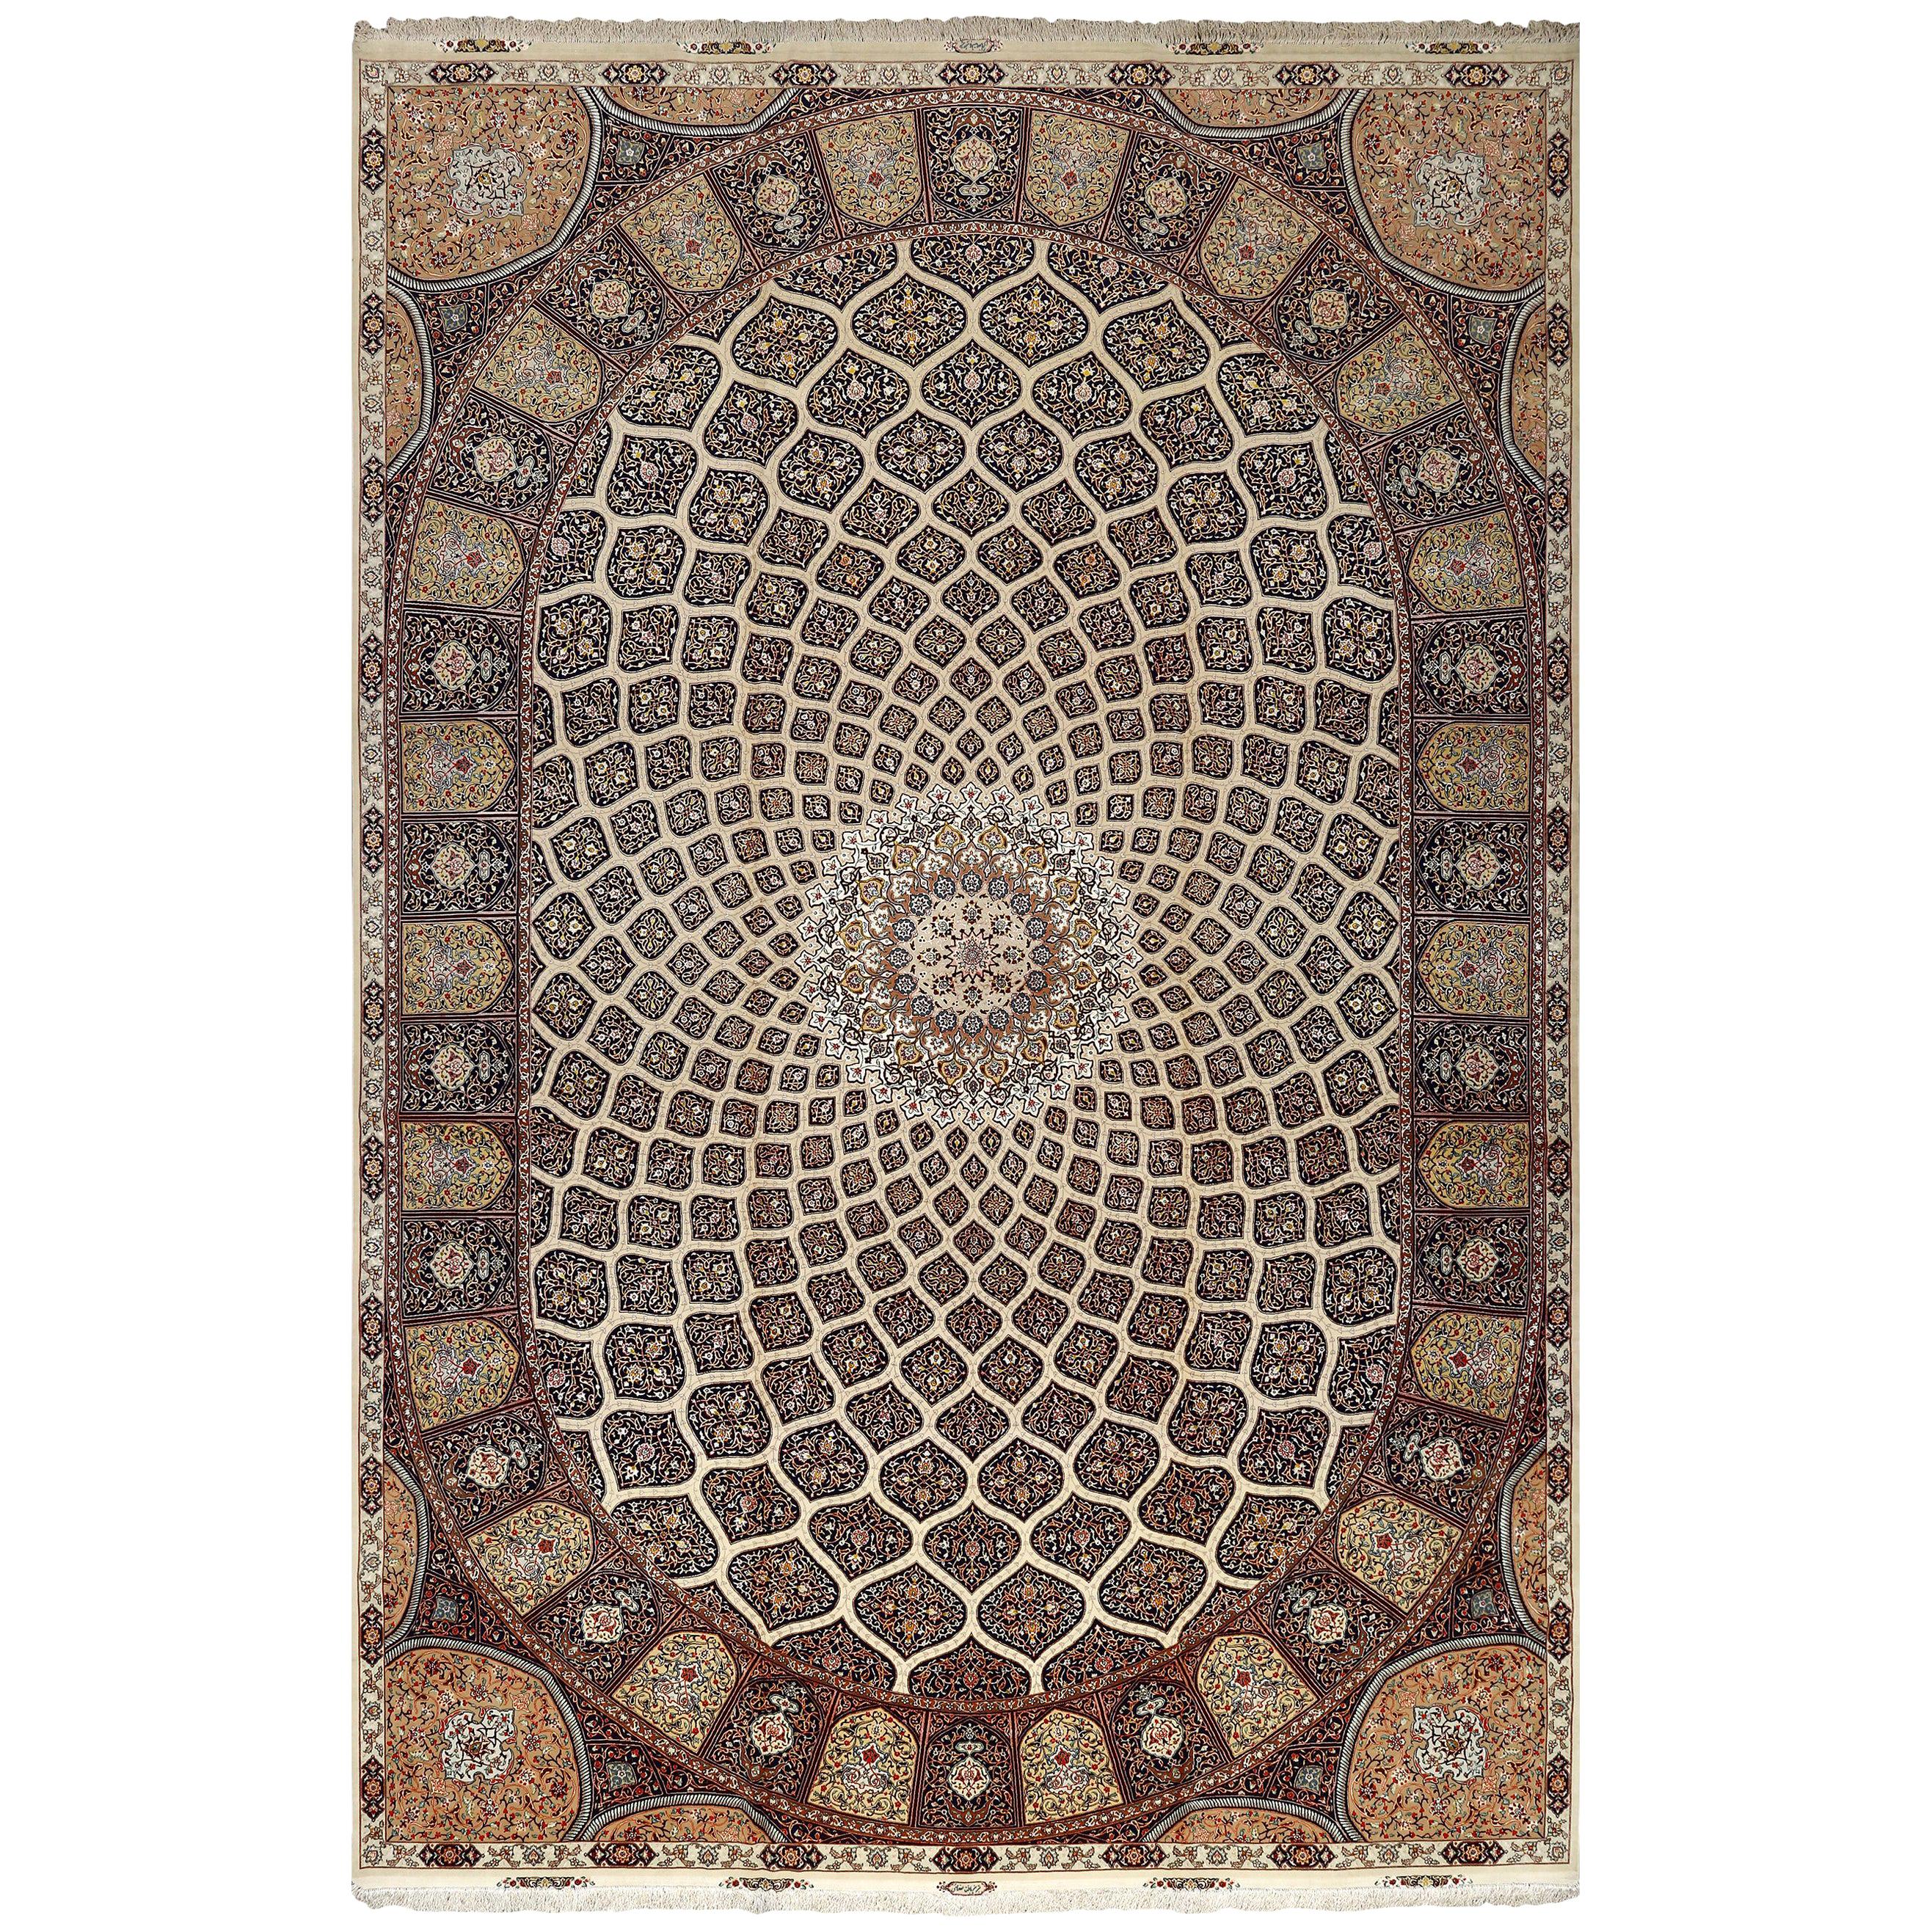 Nazmiyal Collection Vintage Tabriz Persian Rug. Size: 13 ft x 19 ft 4 in 